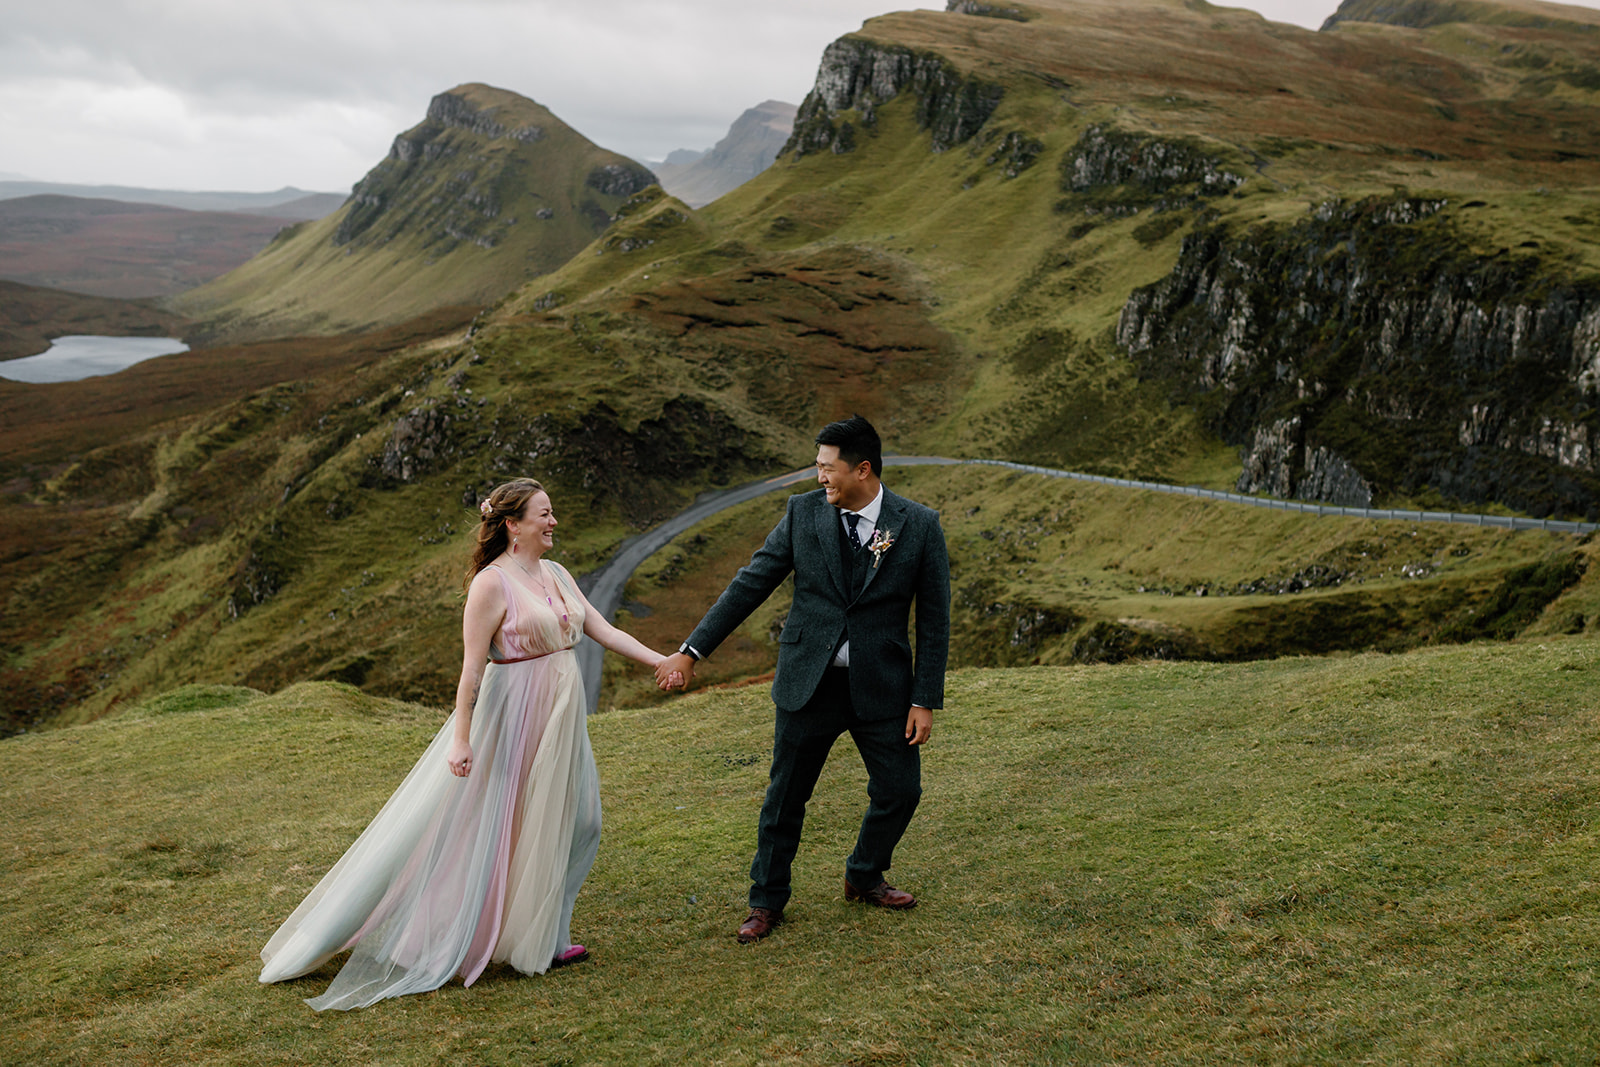 Mellie and Andrew walked hand in hand in the beautiful Quiraing, Isle of Skye